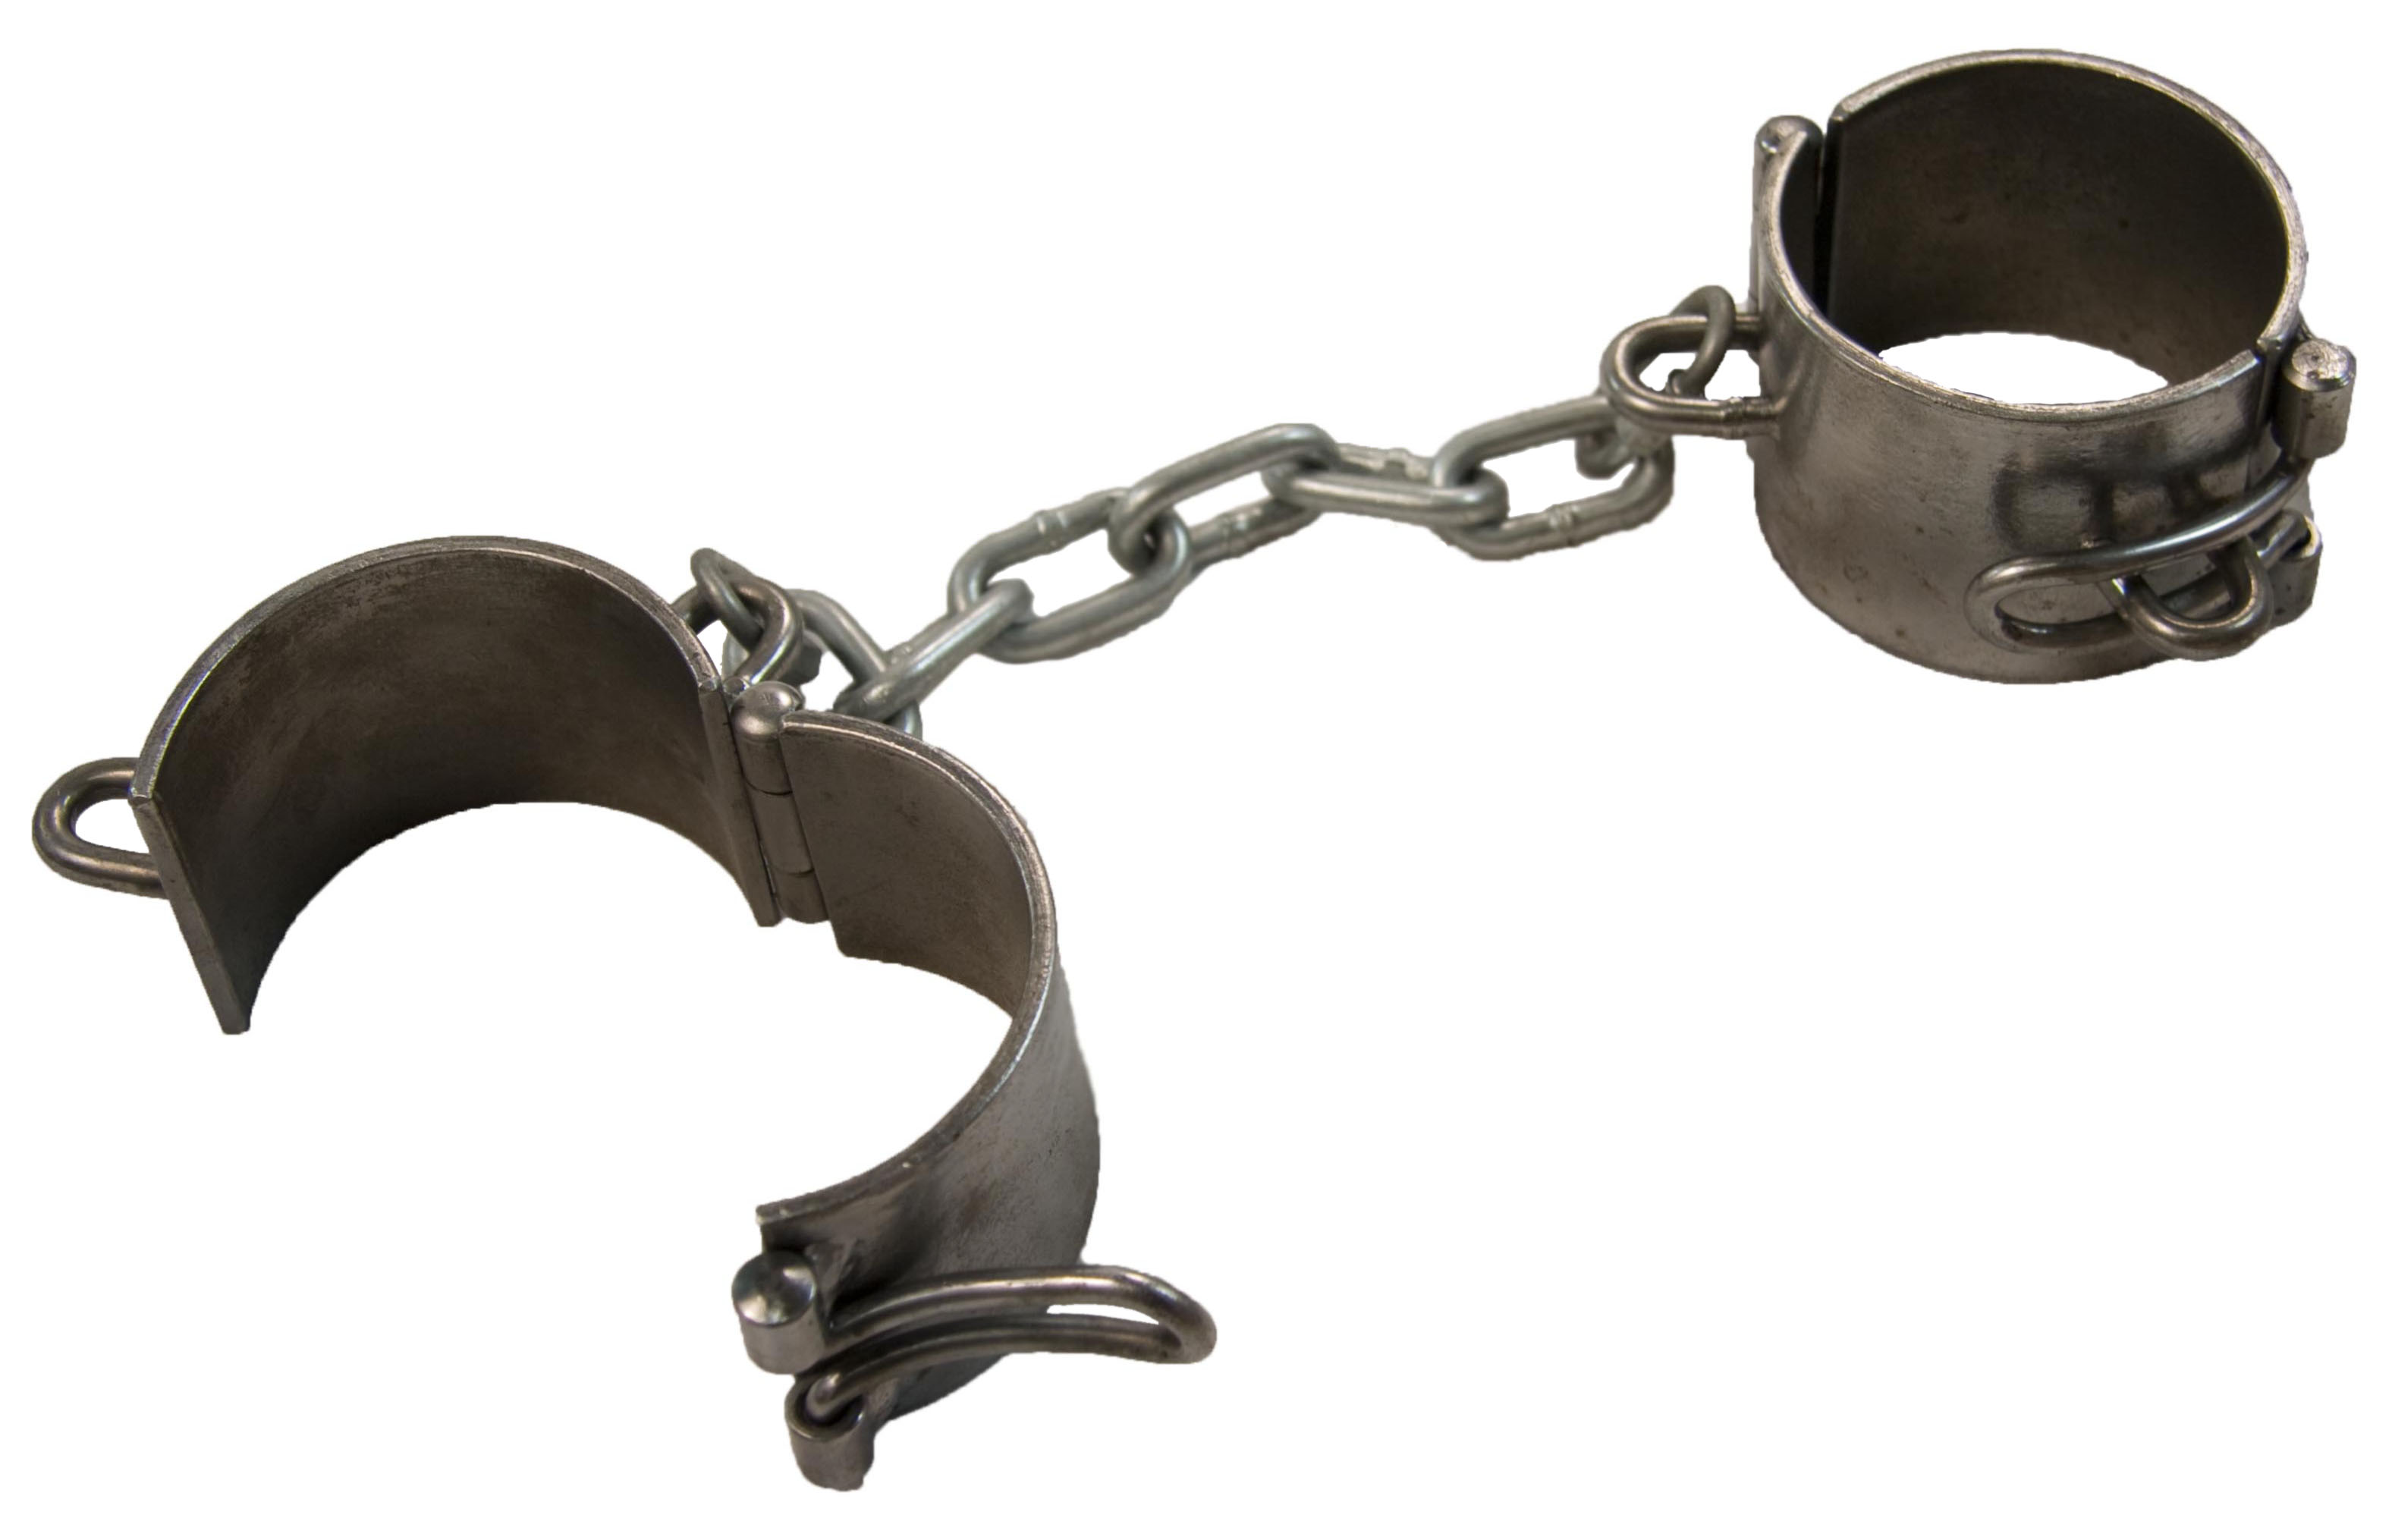 Slavery That Included Having Some Of The Students Wear Mock Shackles